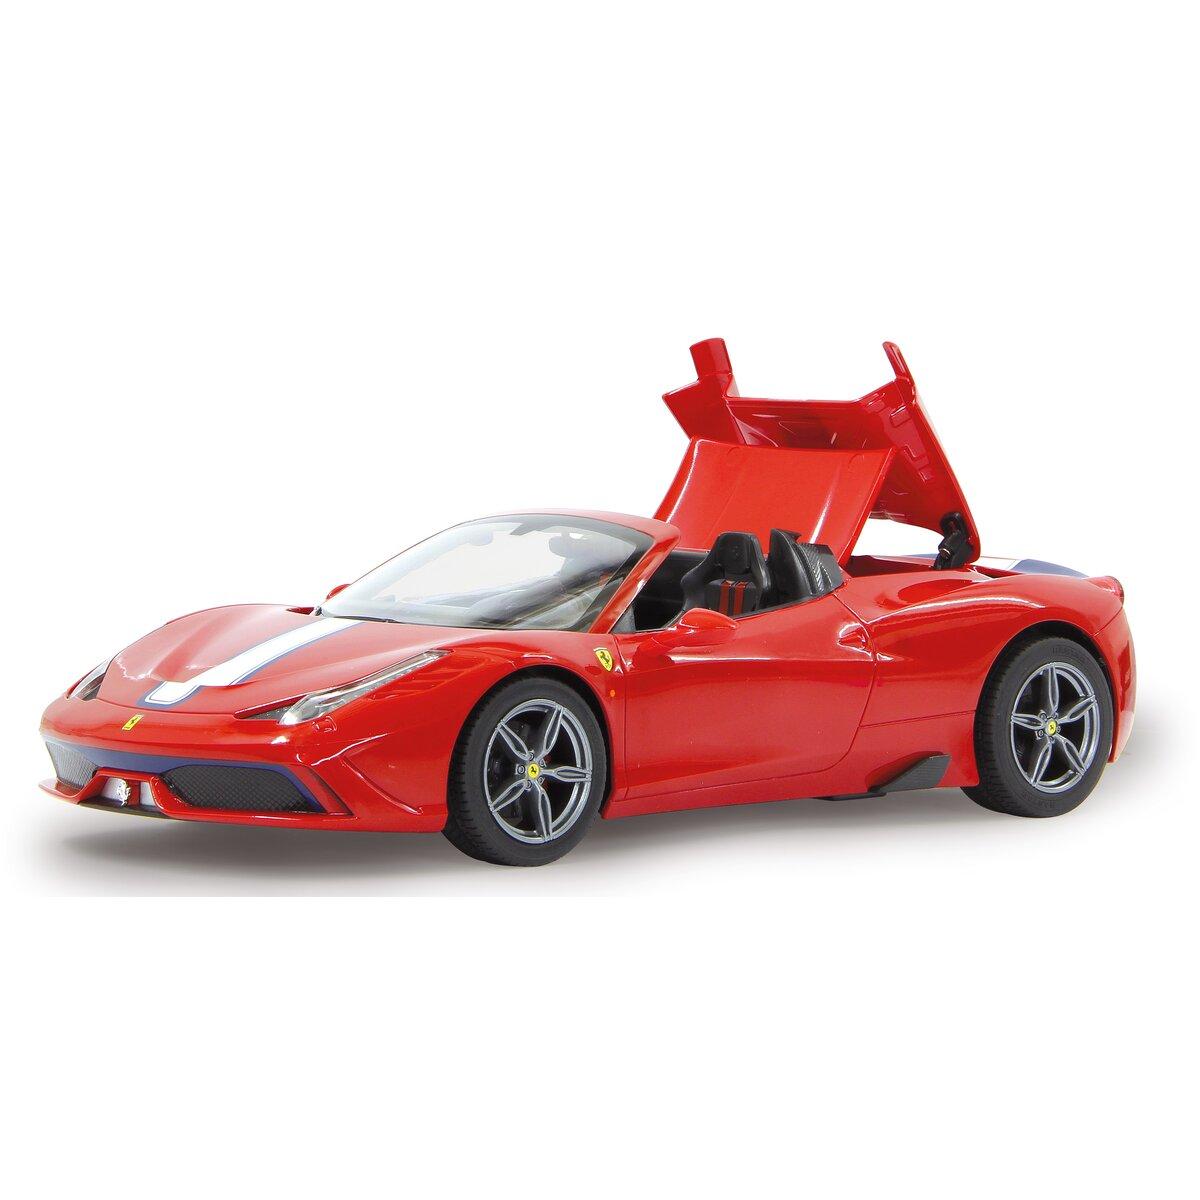 Rc Ferrari: Top Models and Where to Find Them